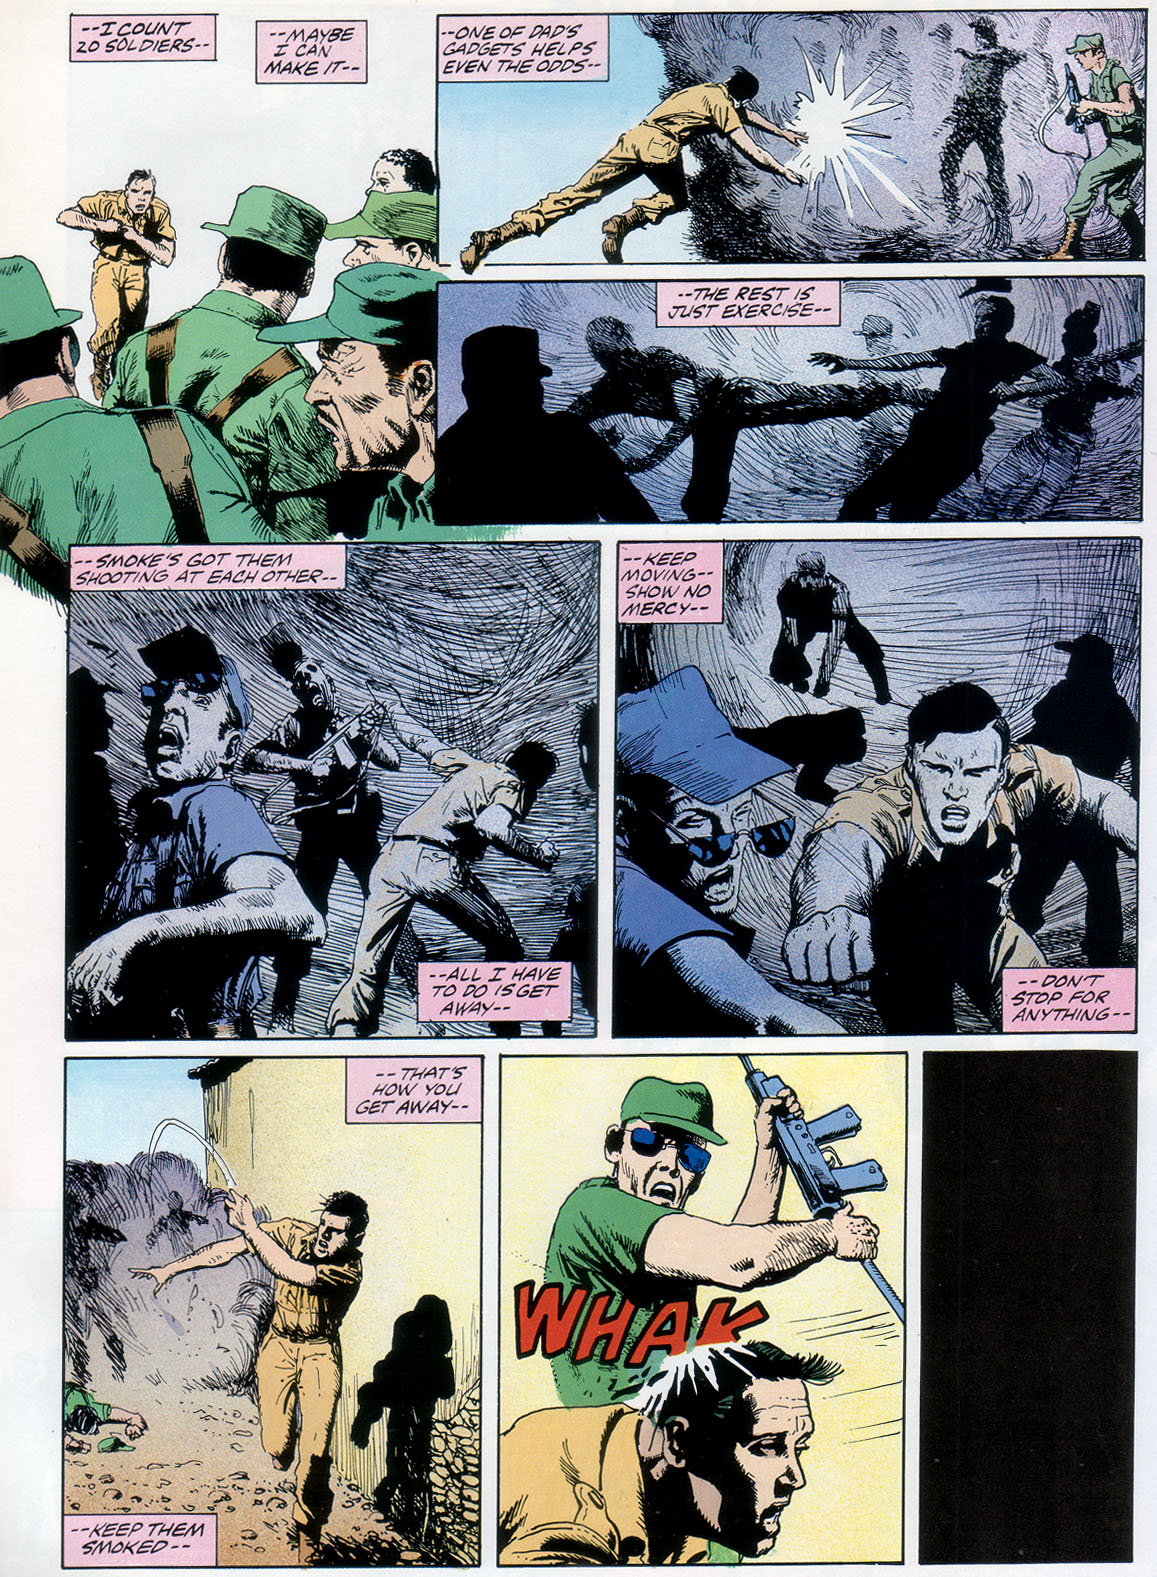 Marvel Graphic Novel issue 57 - Rick Mason - The Agent - Page 54